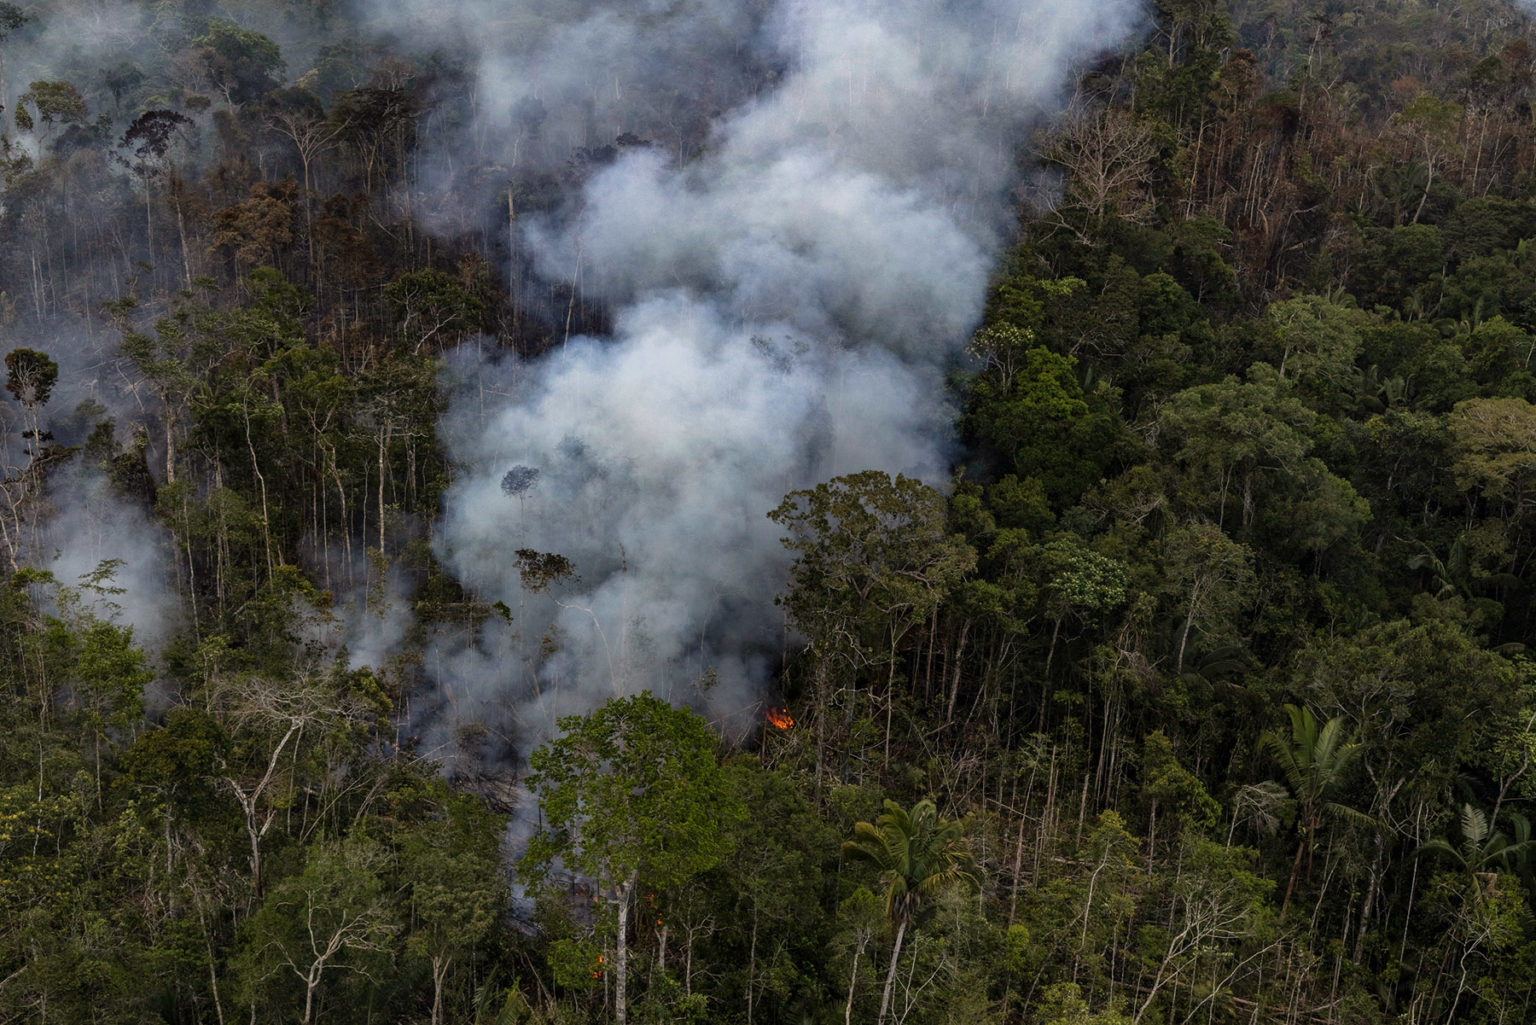 Fire in a degraded forest area being cleared in Novo Aripuanã, Amazonas state. Photo: Victor Moriyama / Greenpeace